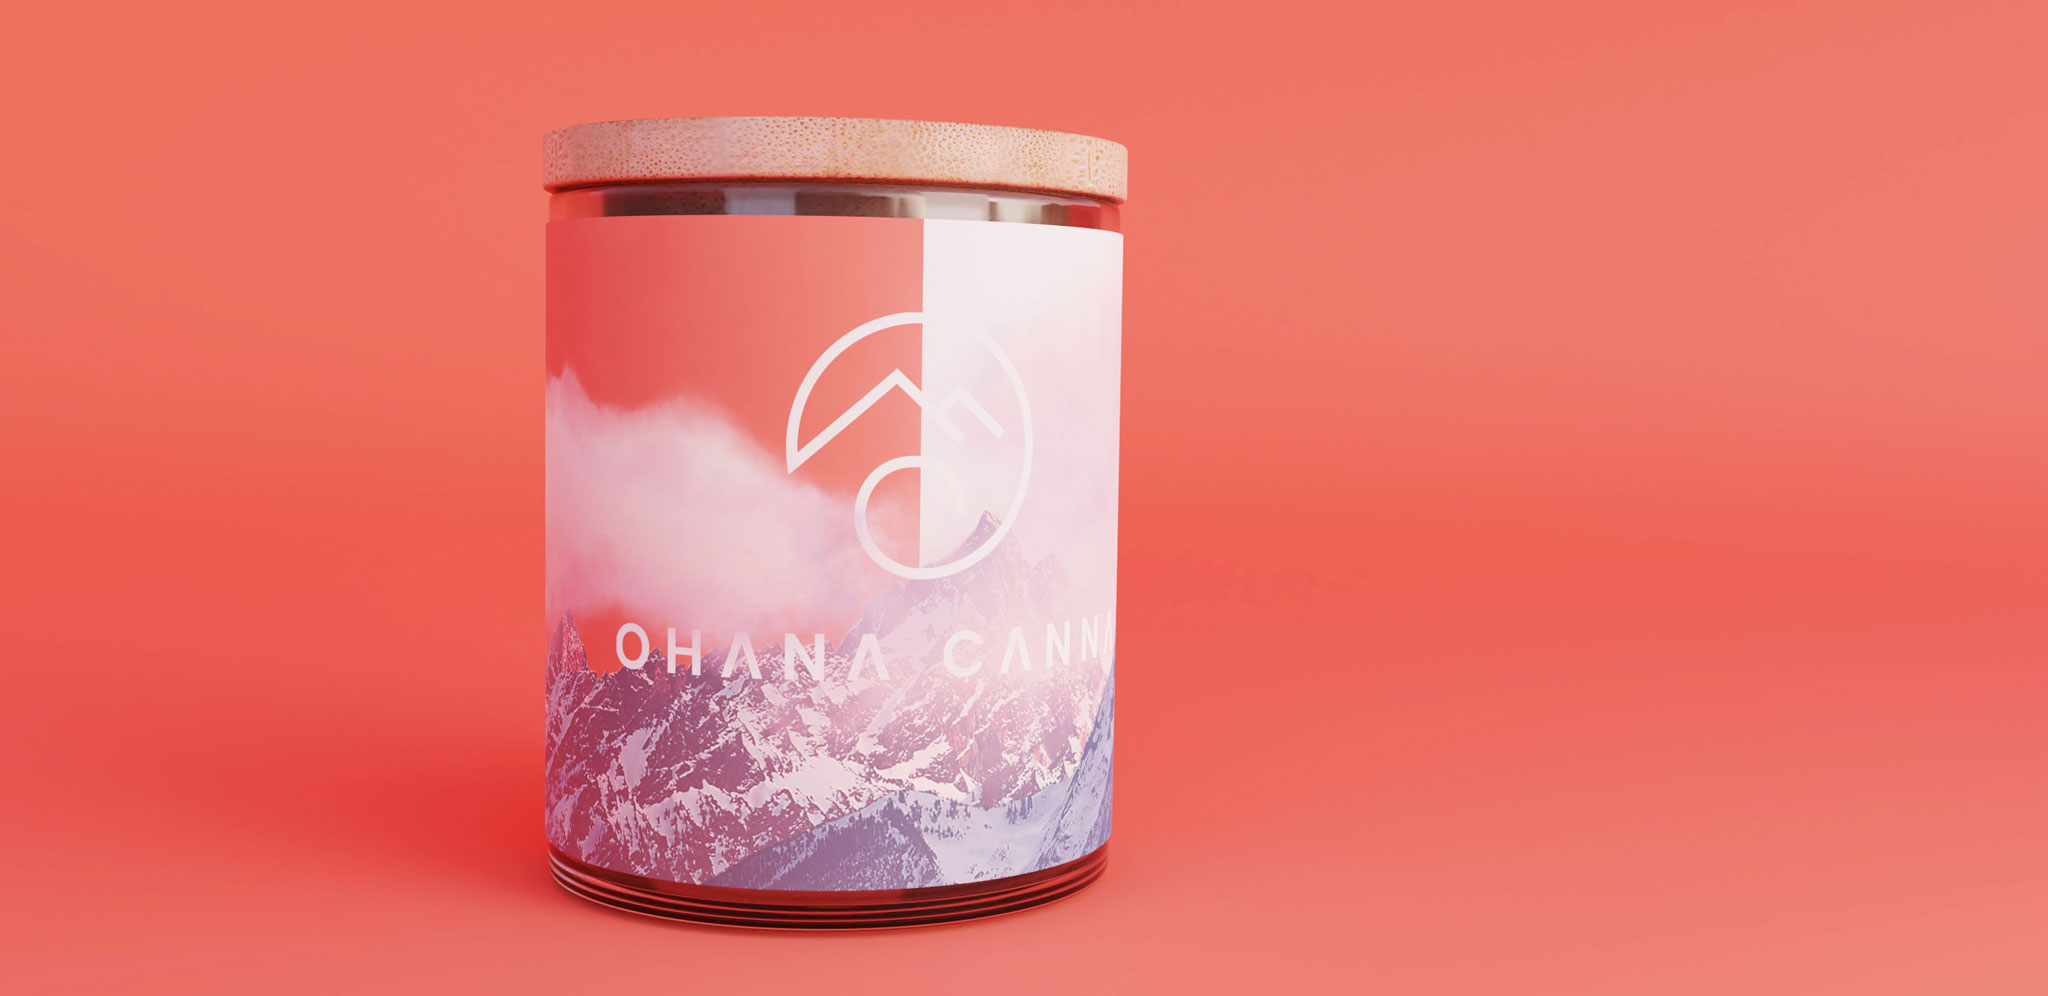 Ohana Canna label design front view